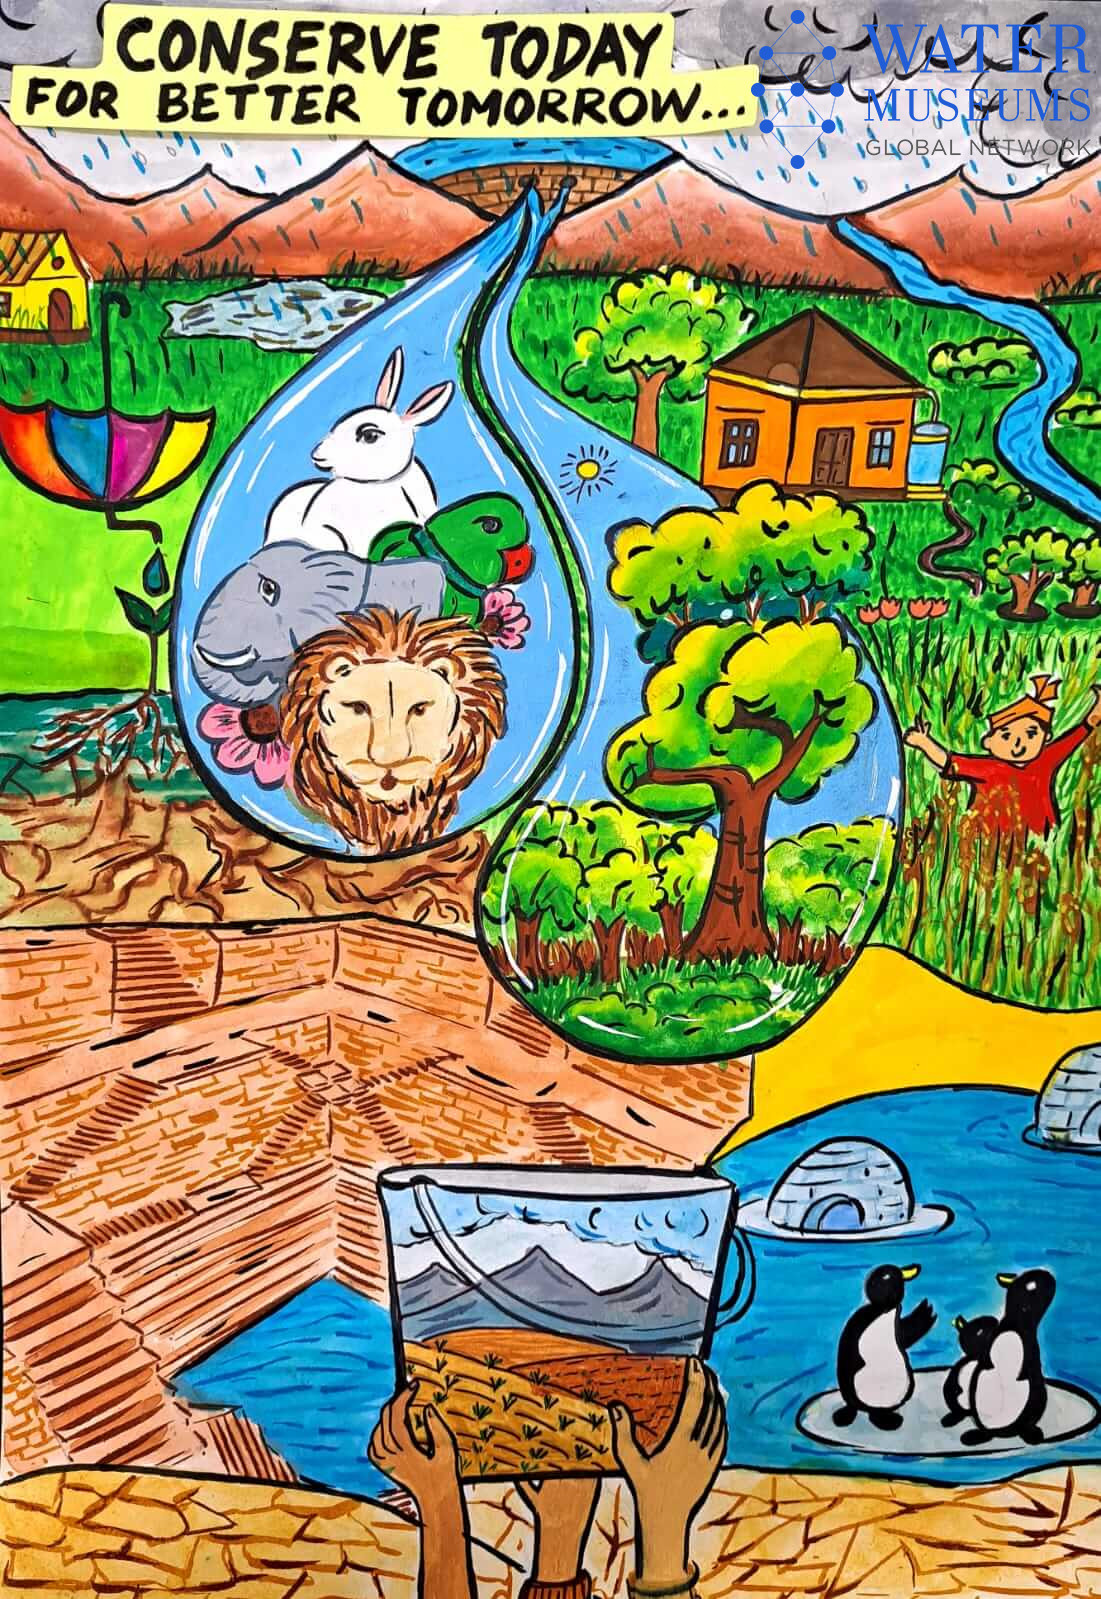 ACWADAM and Bhujal Abhiyan Organize Grand Painting Competition for World  Water Day Awareness - PUNE PULSE